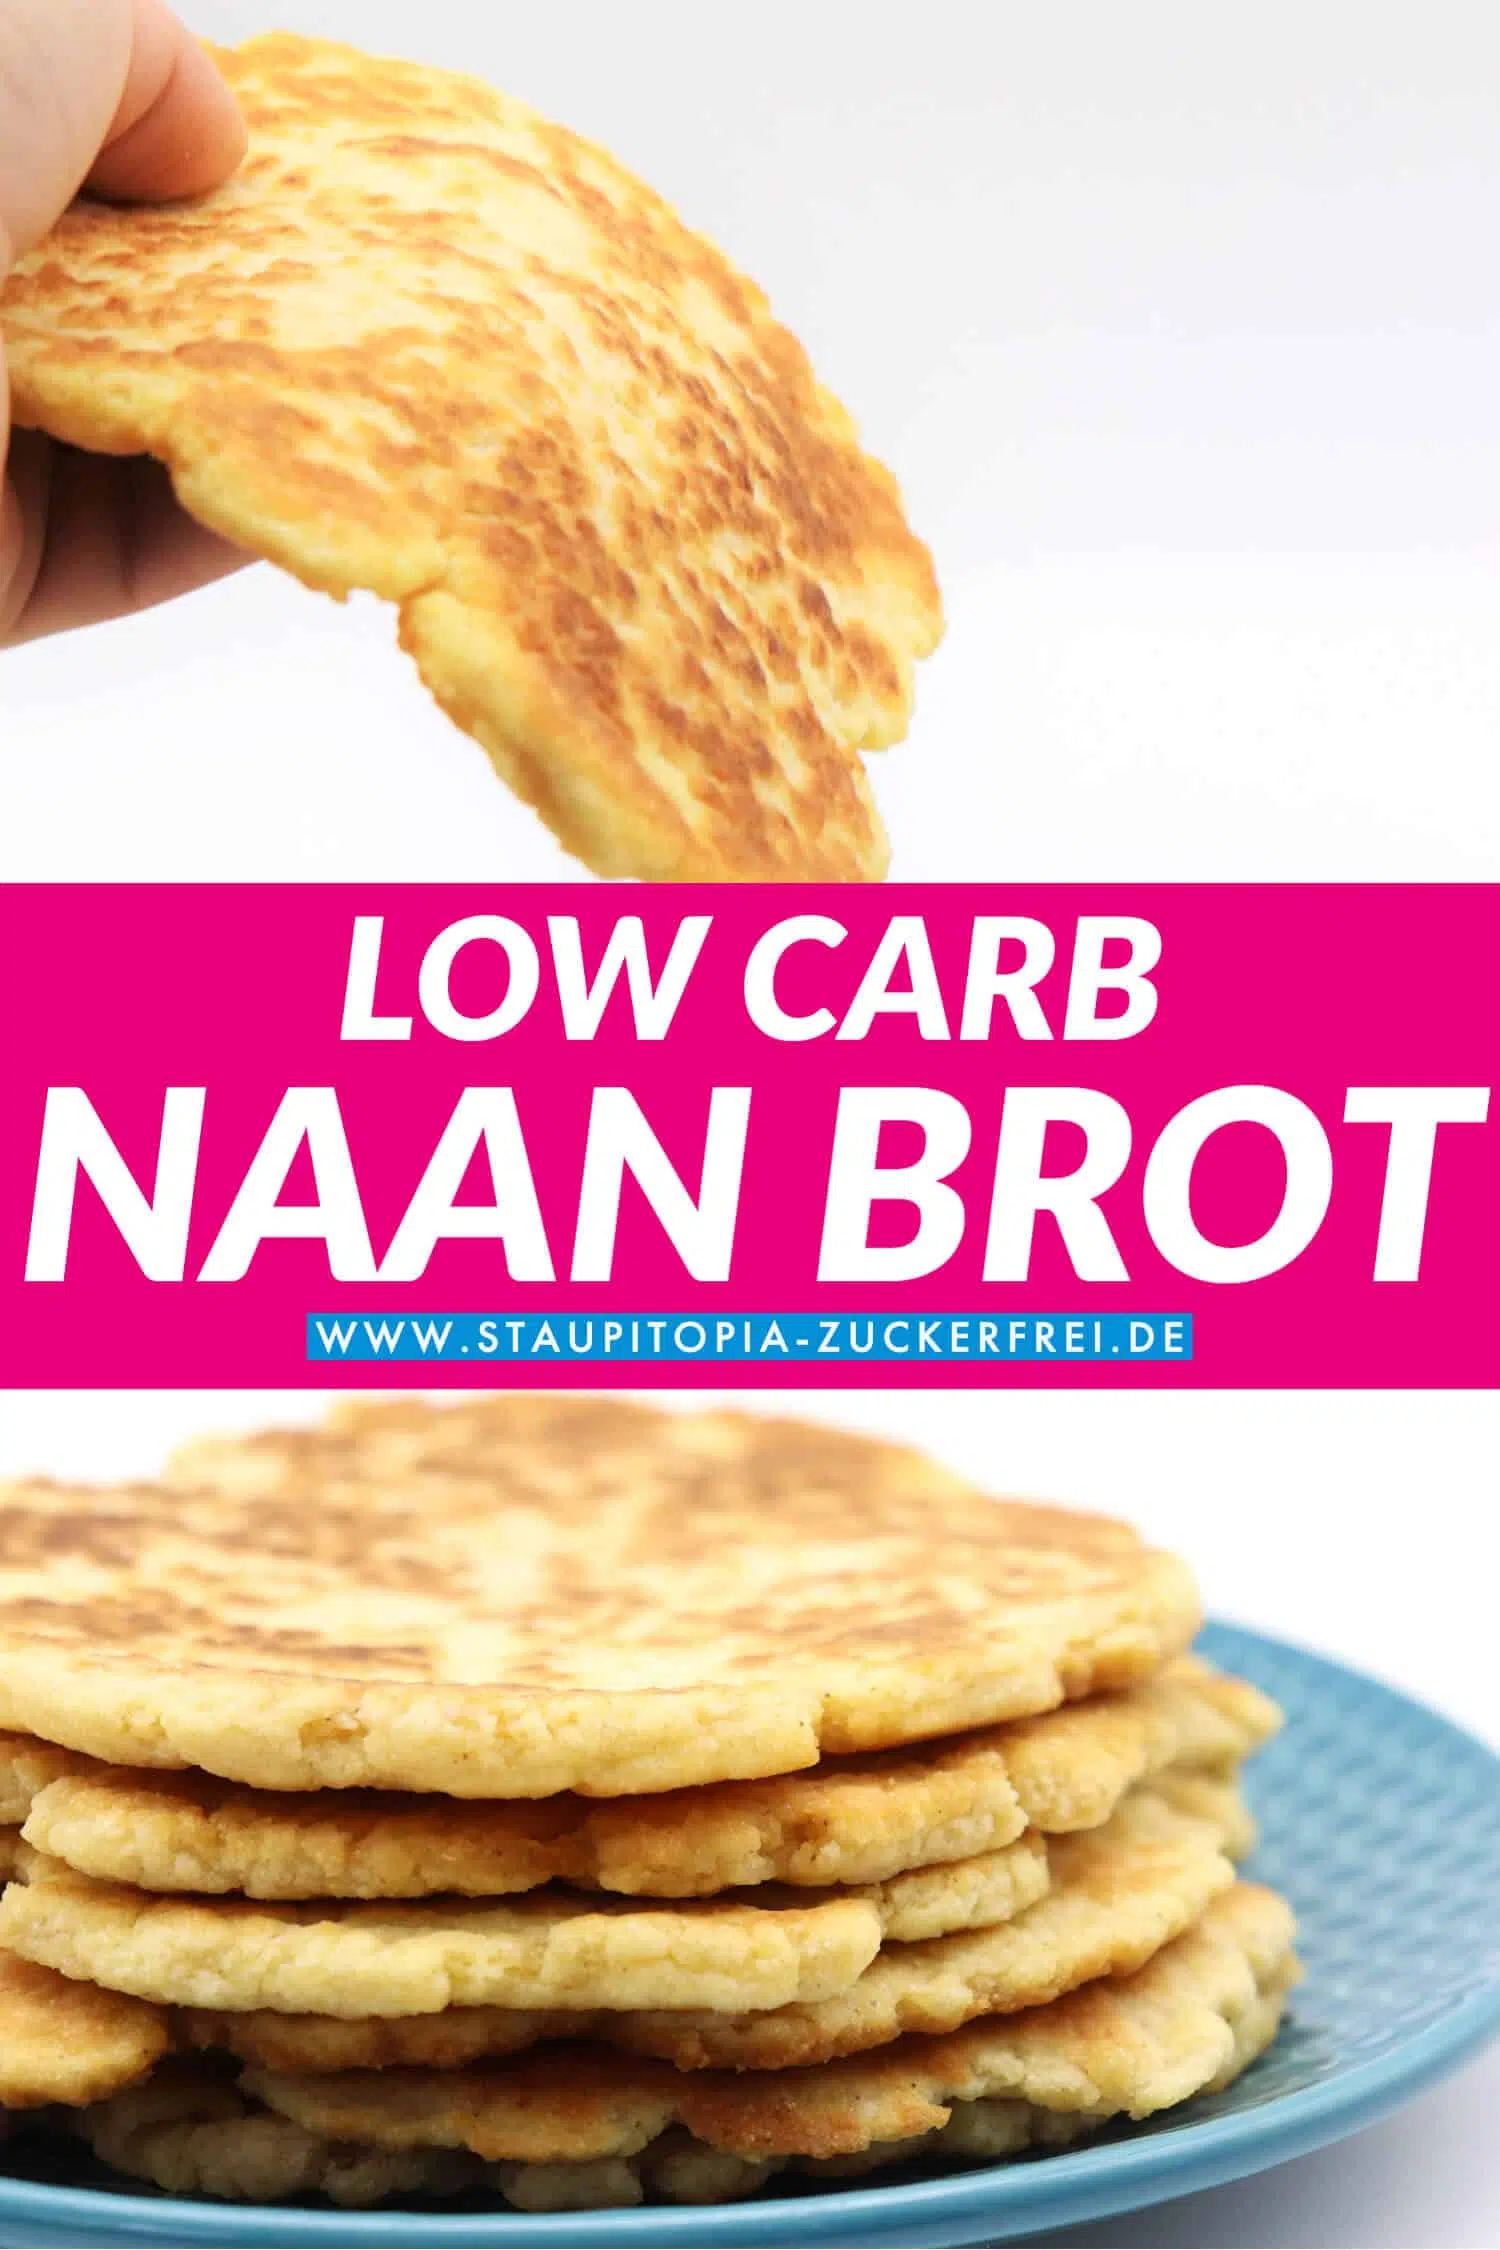 Low Carb Naan Brot ohne Kohlenhydrate